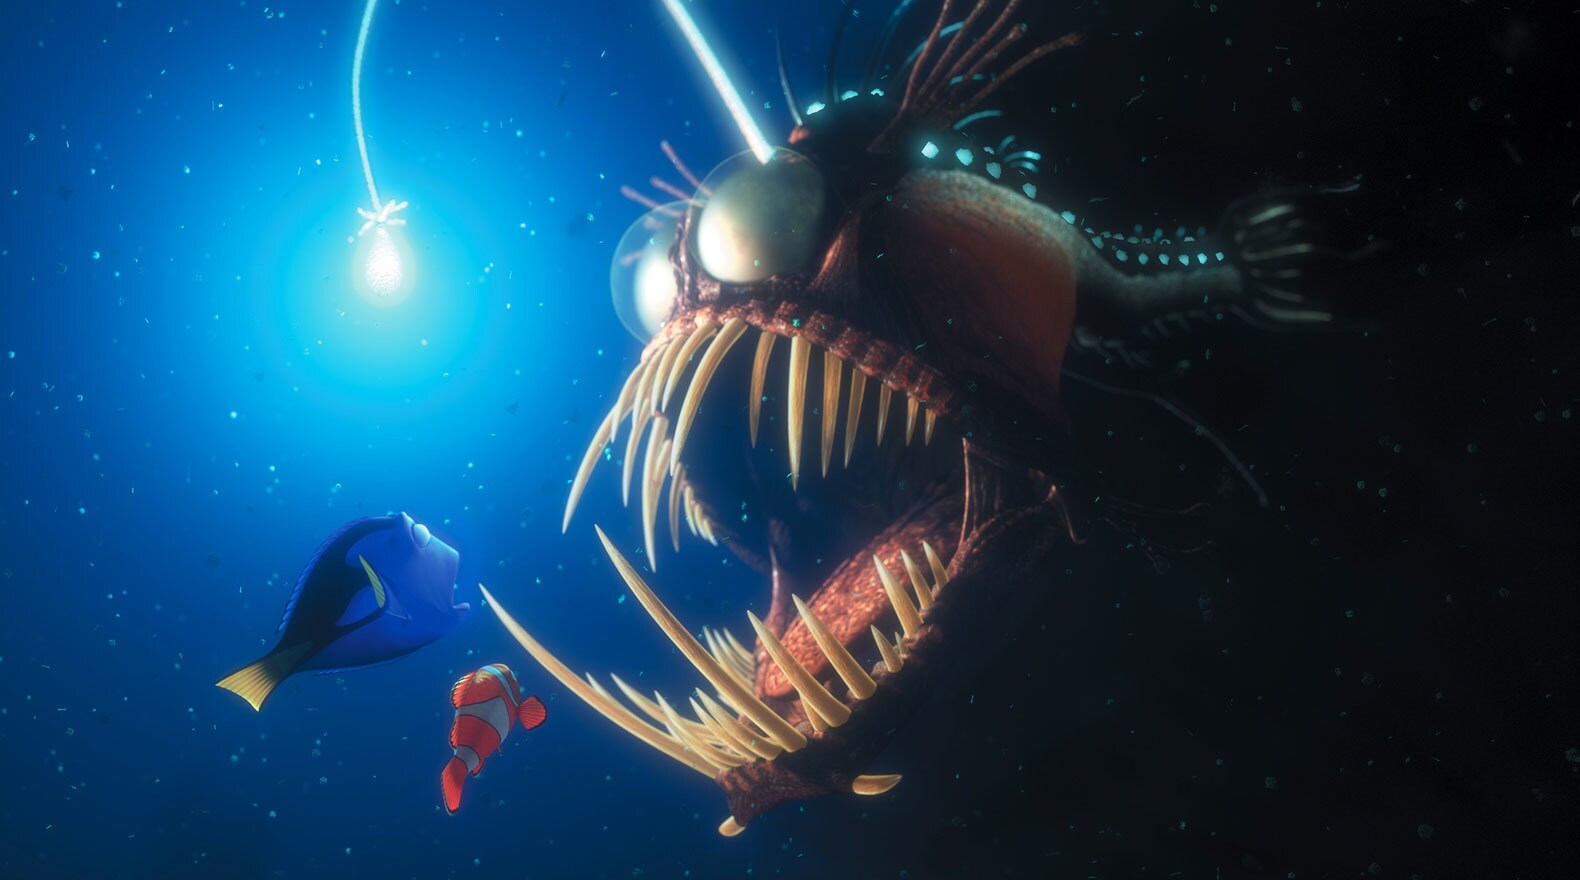 Albert Brooks as Marlin and Ellen DeGeneres as Dory, encounter a scary deep sea creature with light in "Finding Nemo"